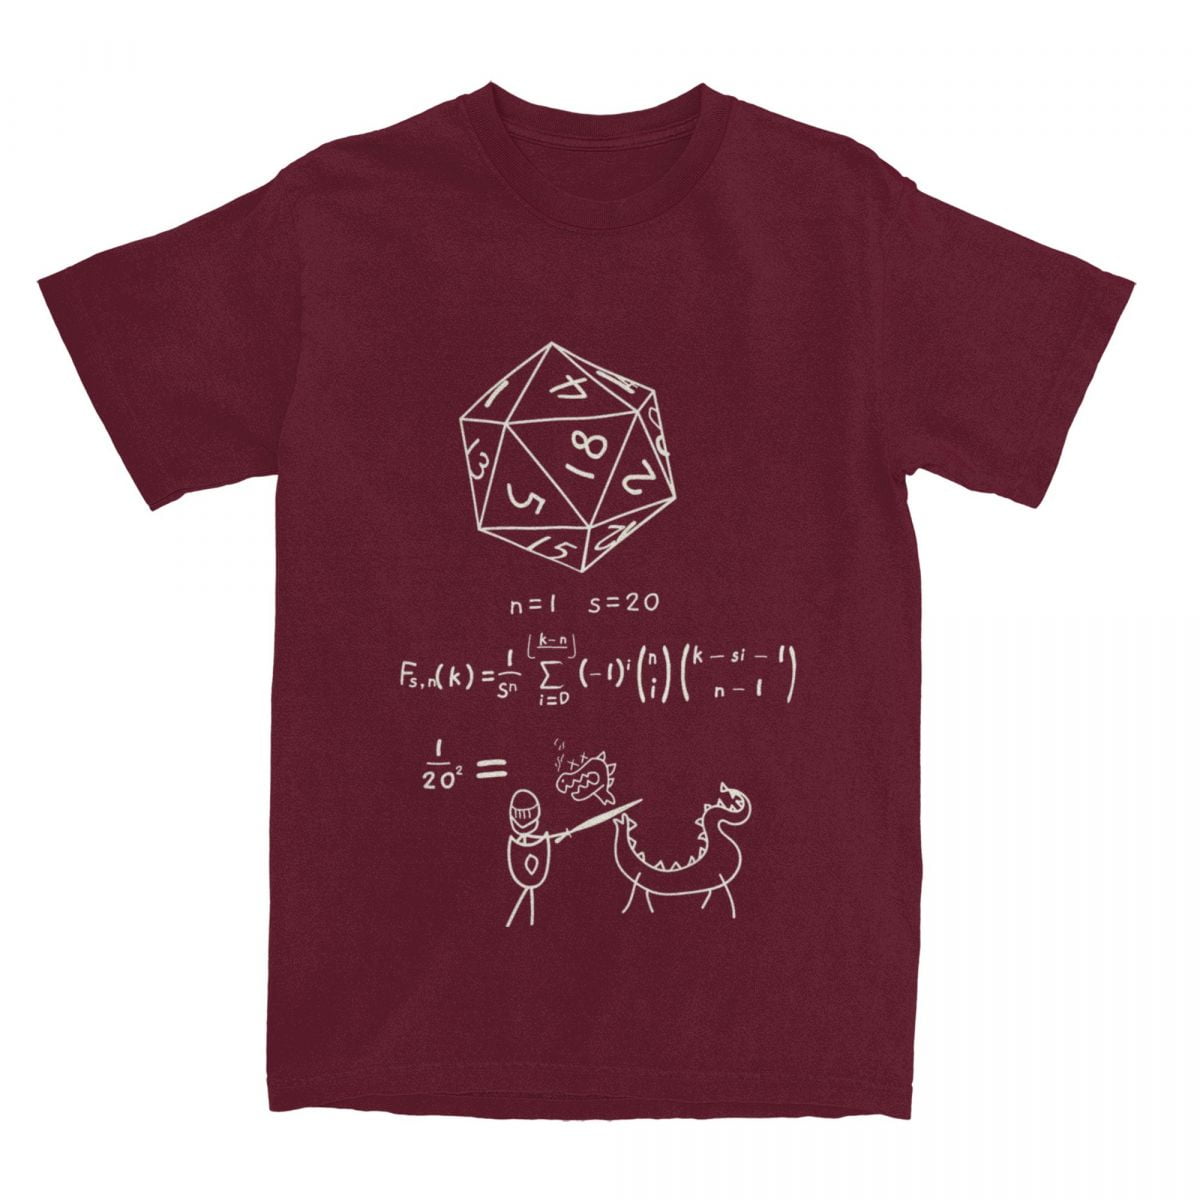 Casual Game Dnd Science Of 20 Sided Dice D20 T Shirt Men Women's Cotton ...